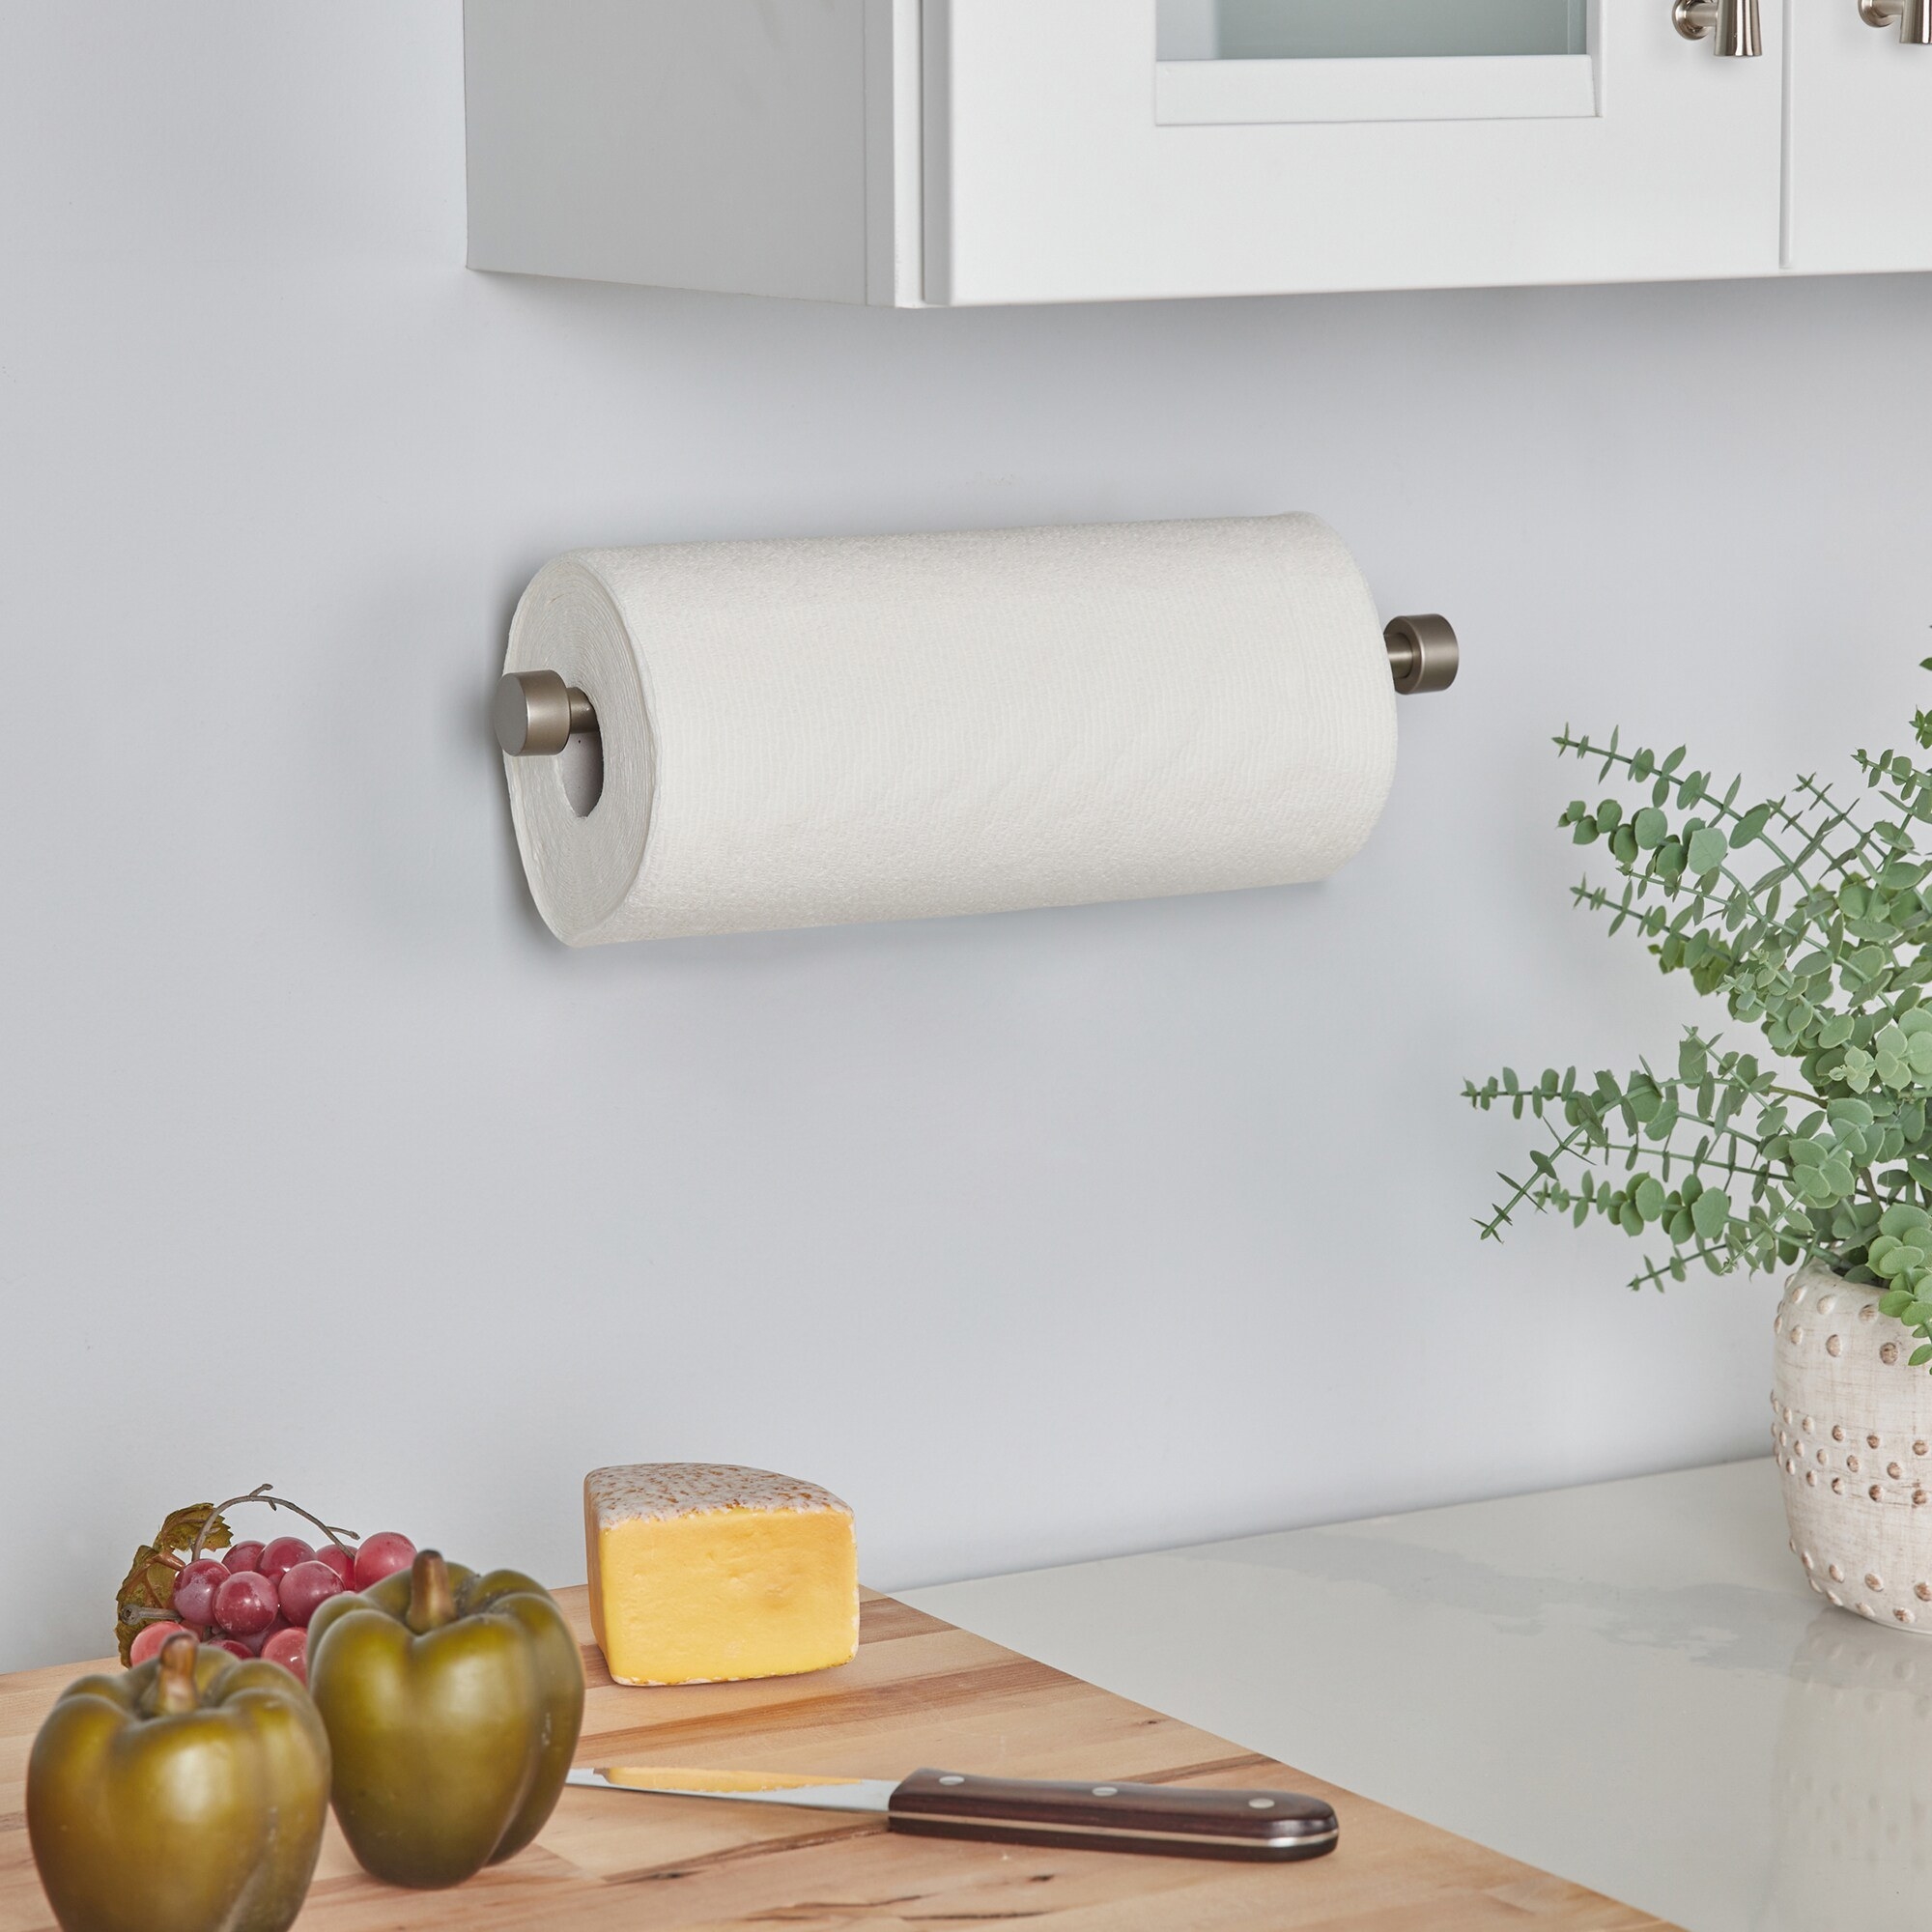 A metal nickel paper towel holder that can be wiped clean with a damp cloth